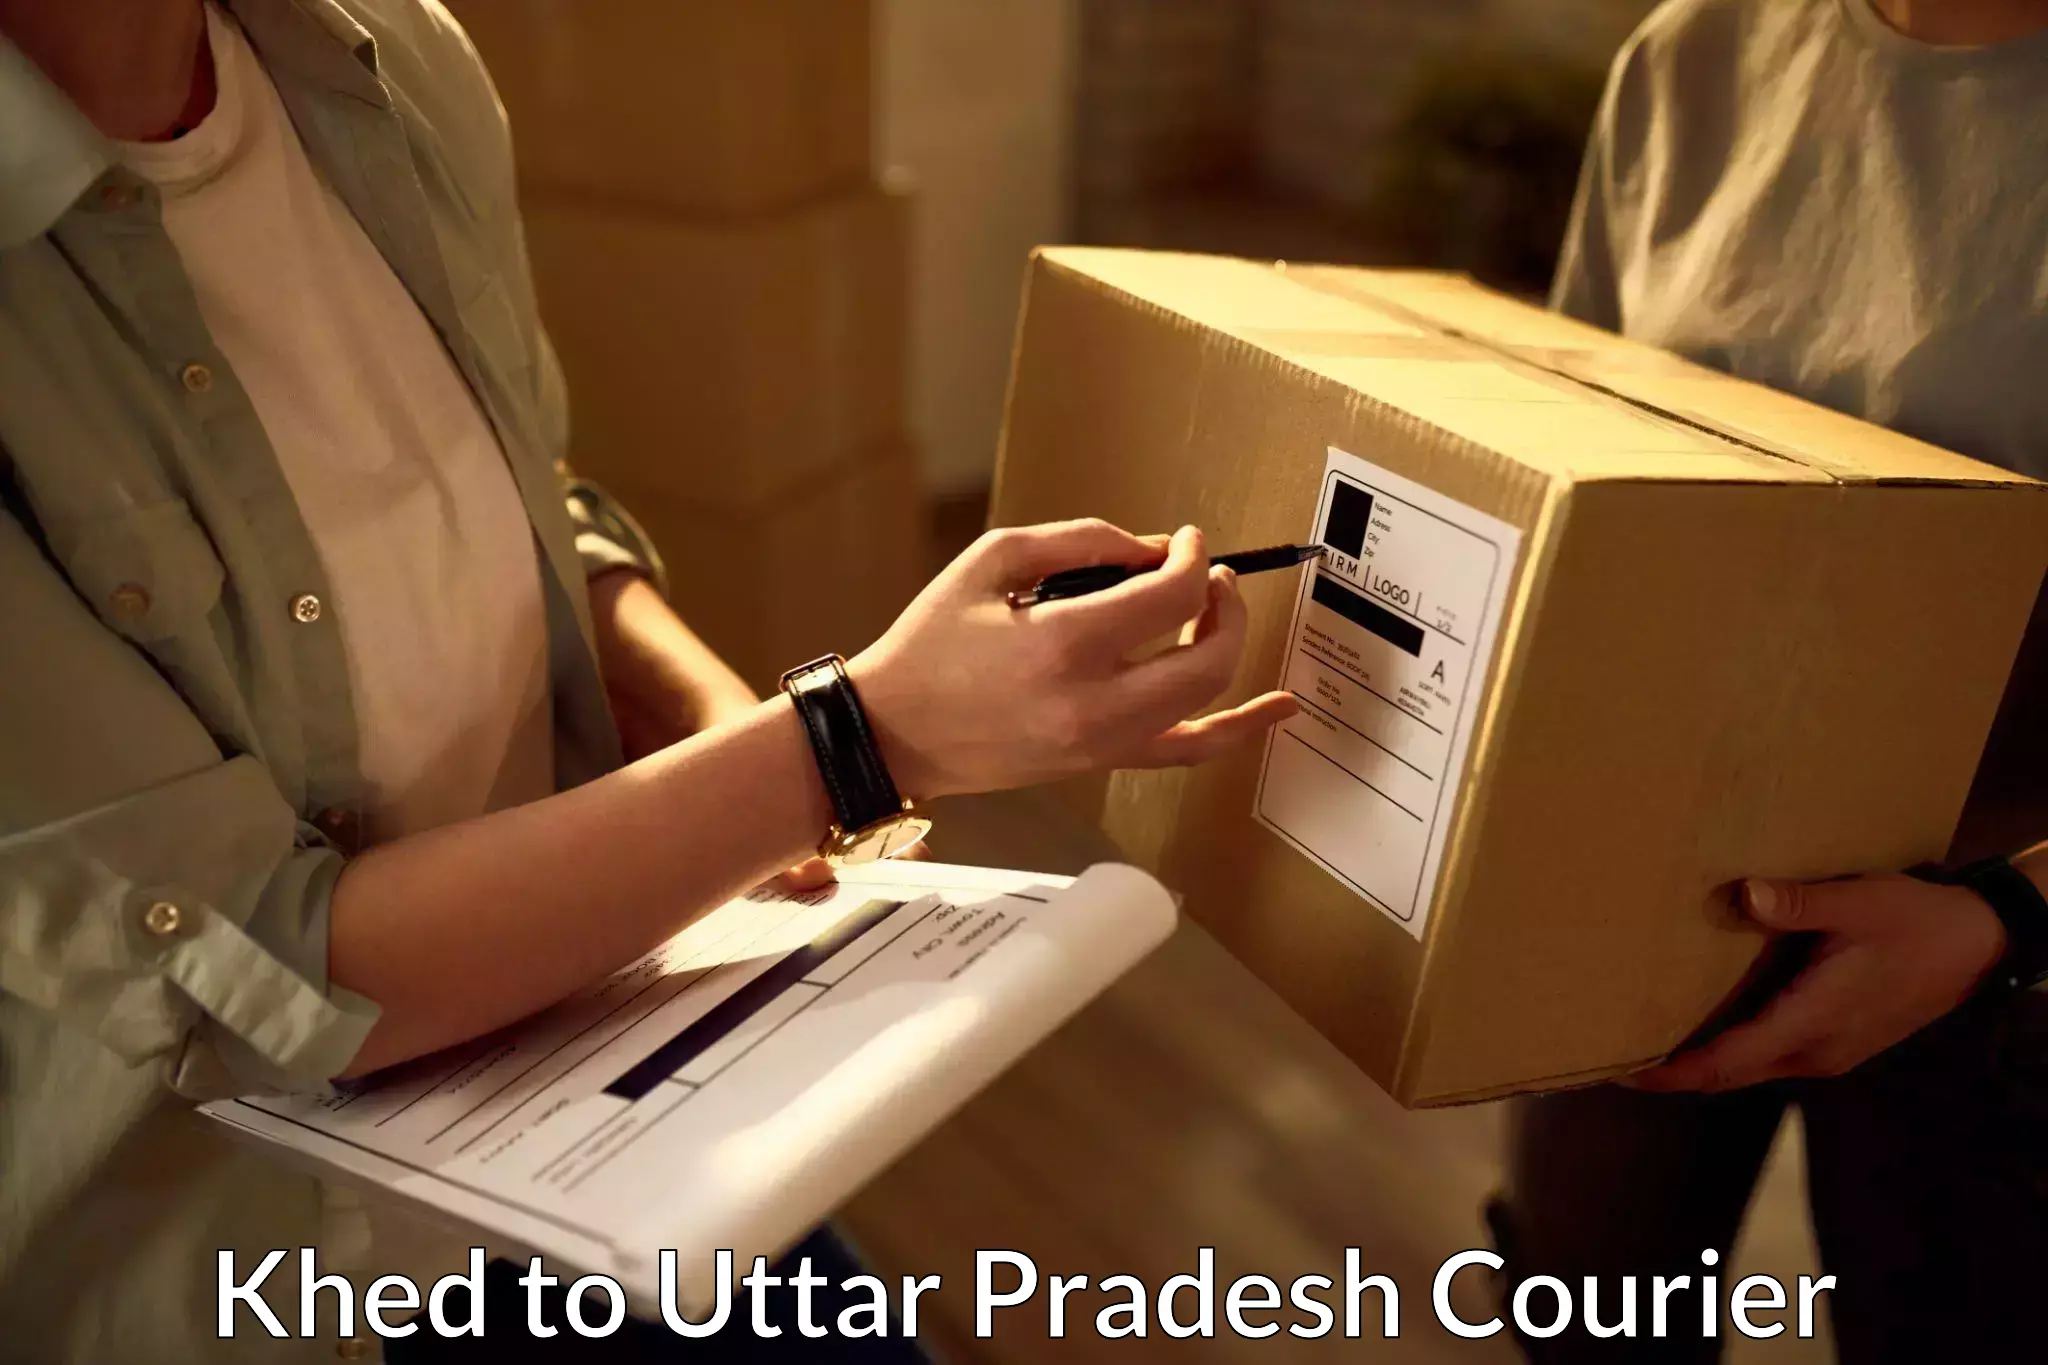 Online shipping calculator Khed to Gorakhpur